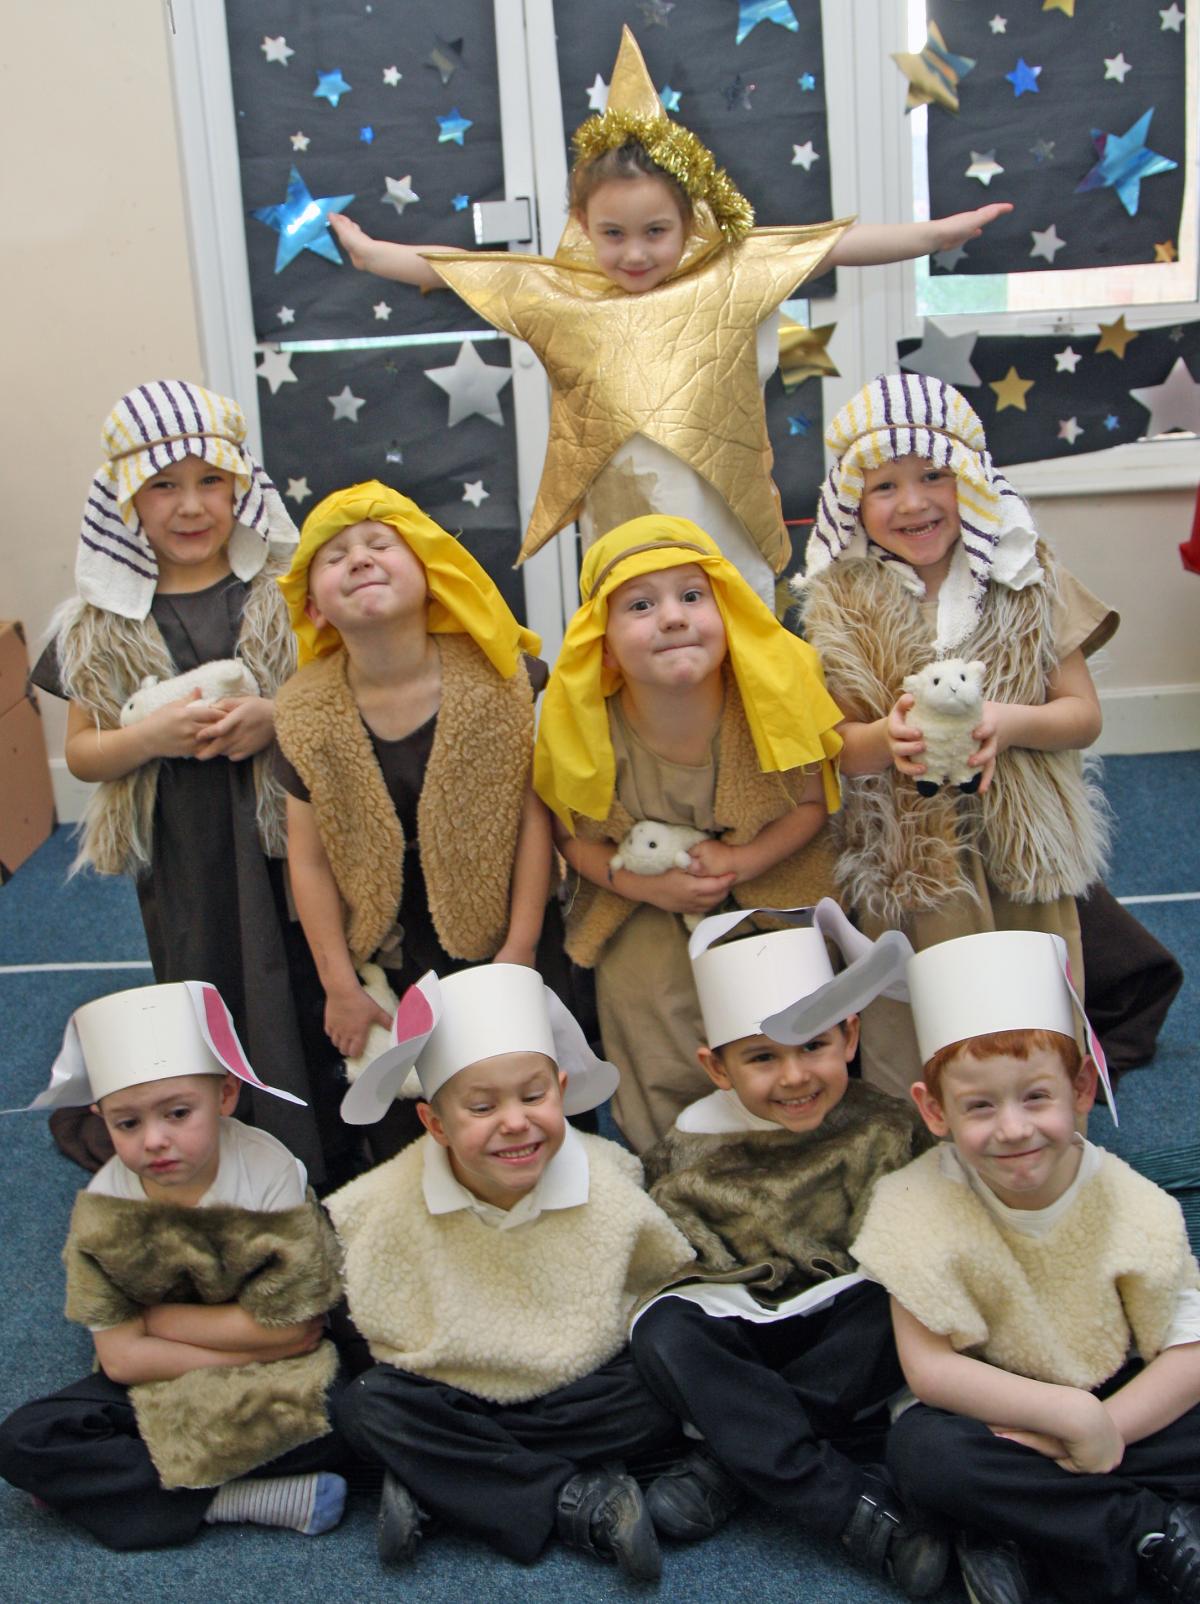 Pictures by Sally Adams Photography. 25% off nativity photo prints,  just add echosave25 at the checkout